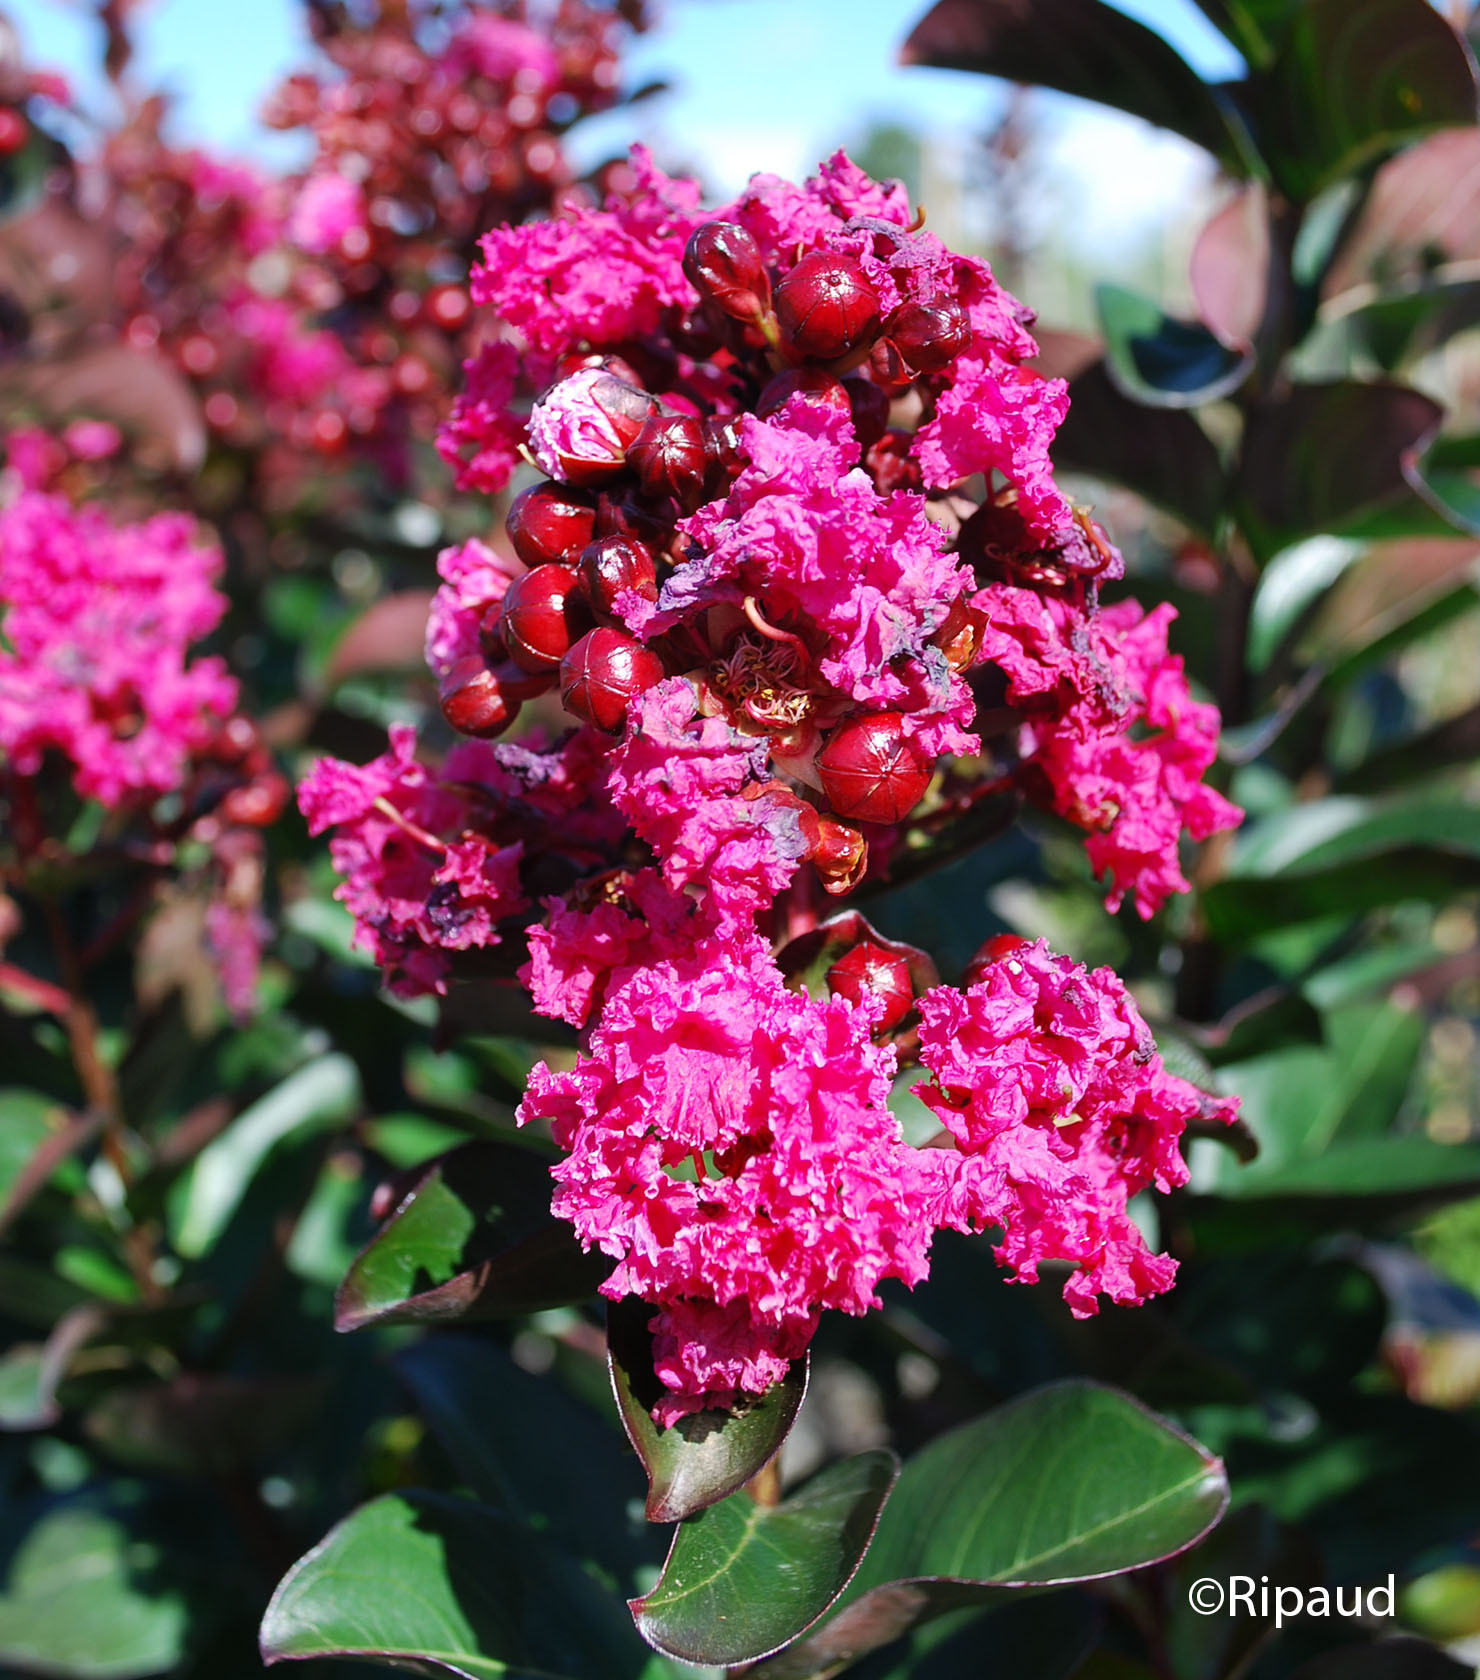 LAGERSTROEMIA indica Pink velours